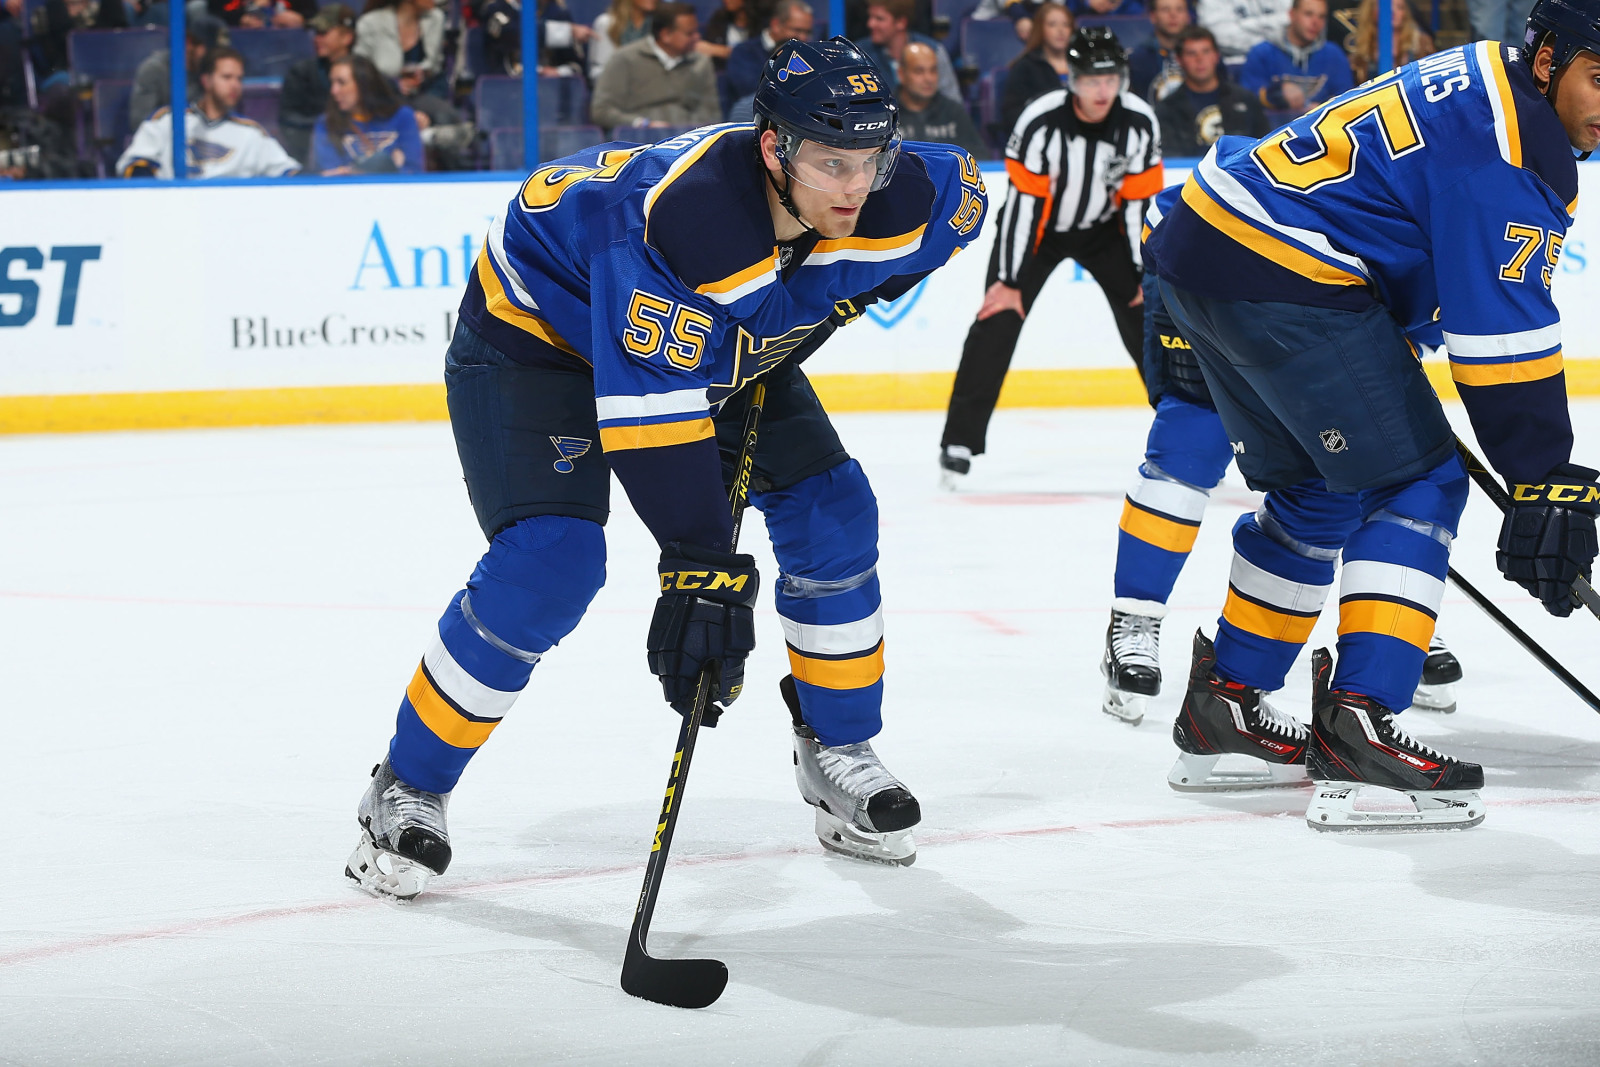 St. Louis Blues Jay Bouwmeester Contract Risk/Reward Is Good